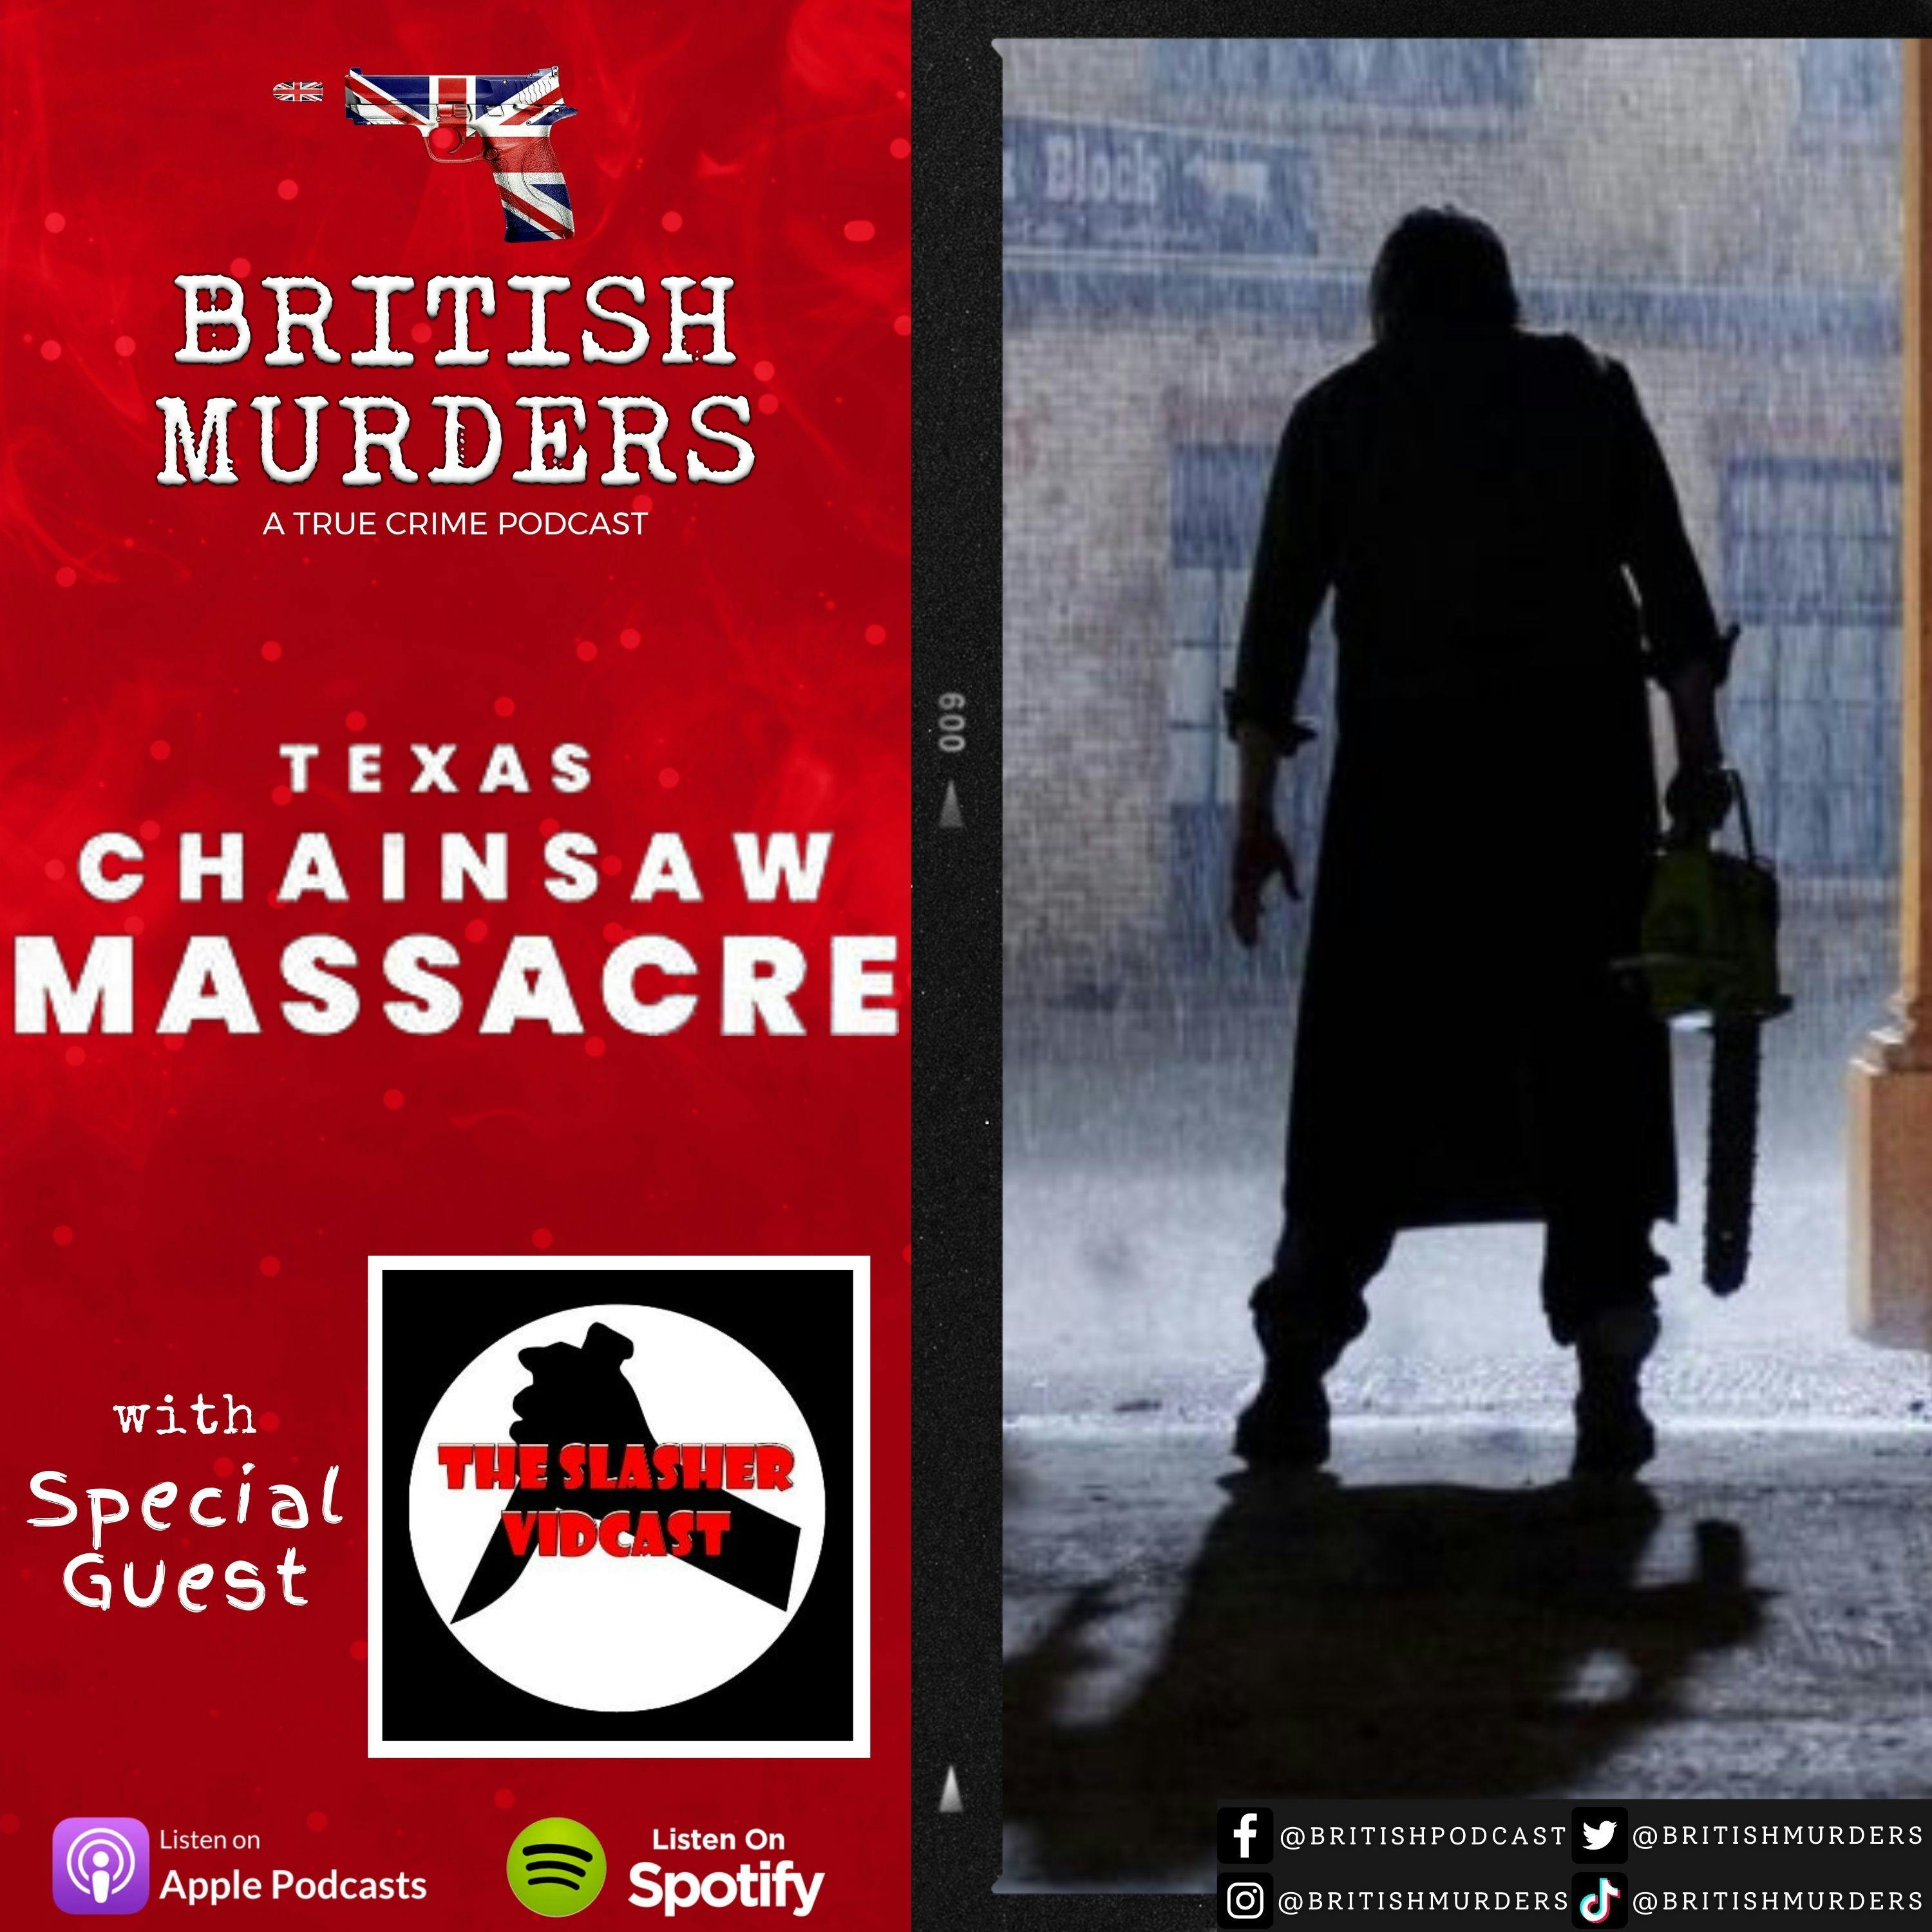 Texas Chainsaw Massacre (2022) | Movie Review feat. The Slasher Vidcast Image